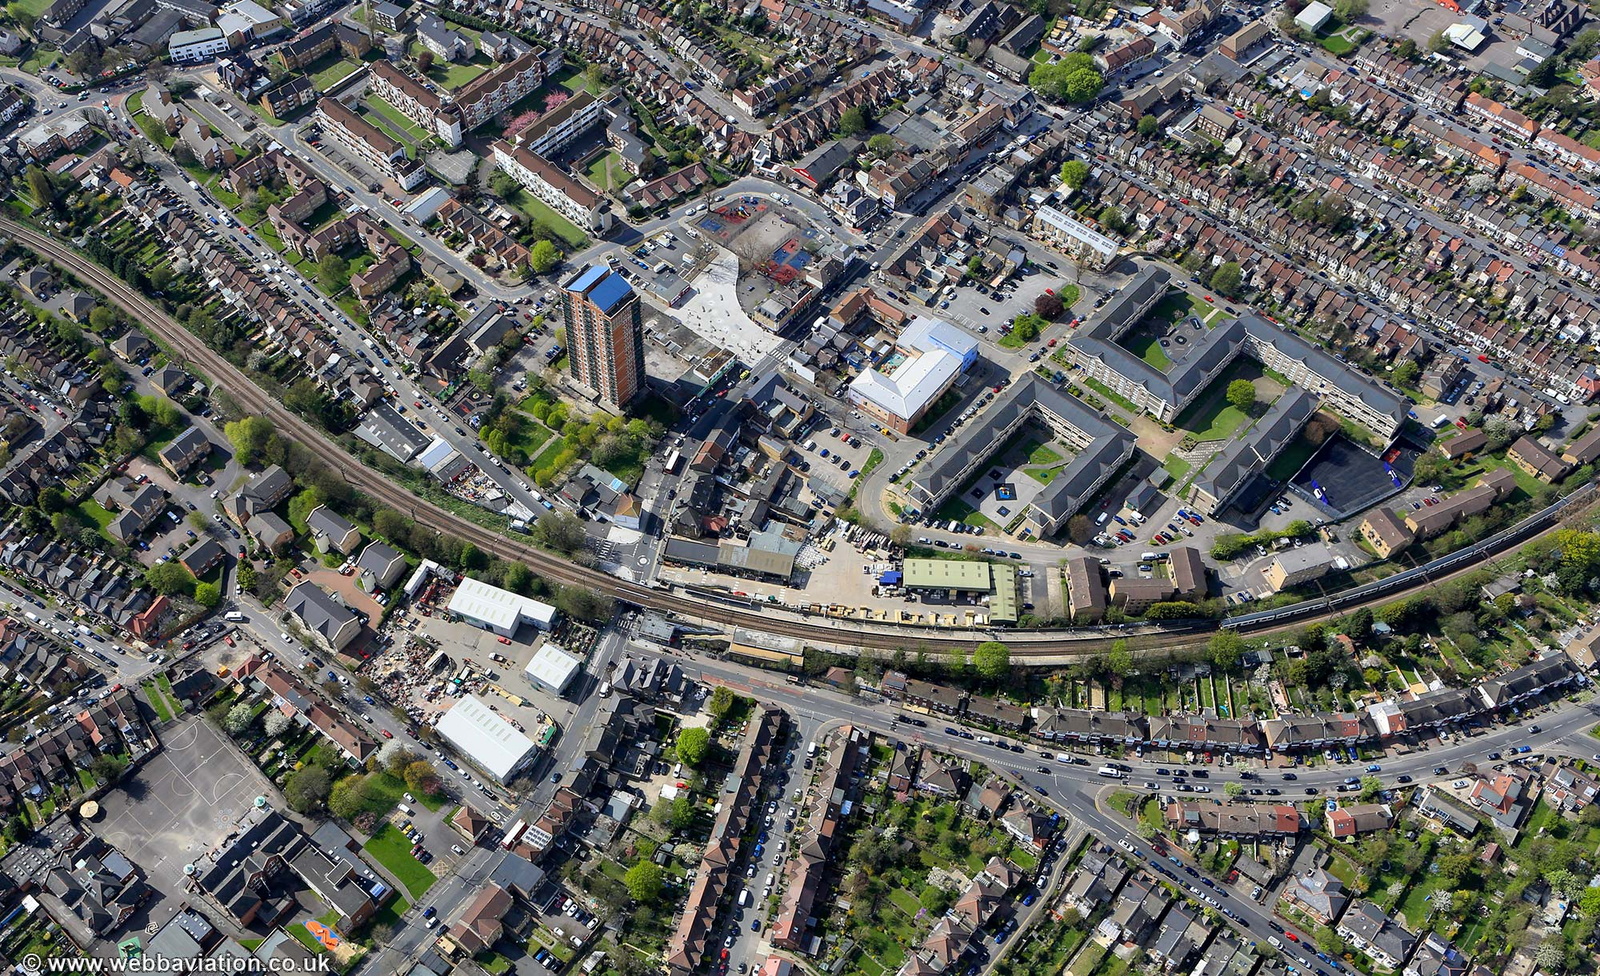  Wood Street railway station ,Walthamstow from the air